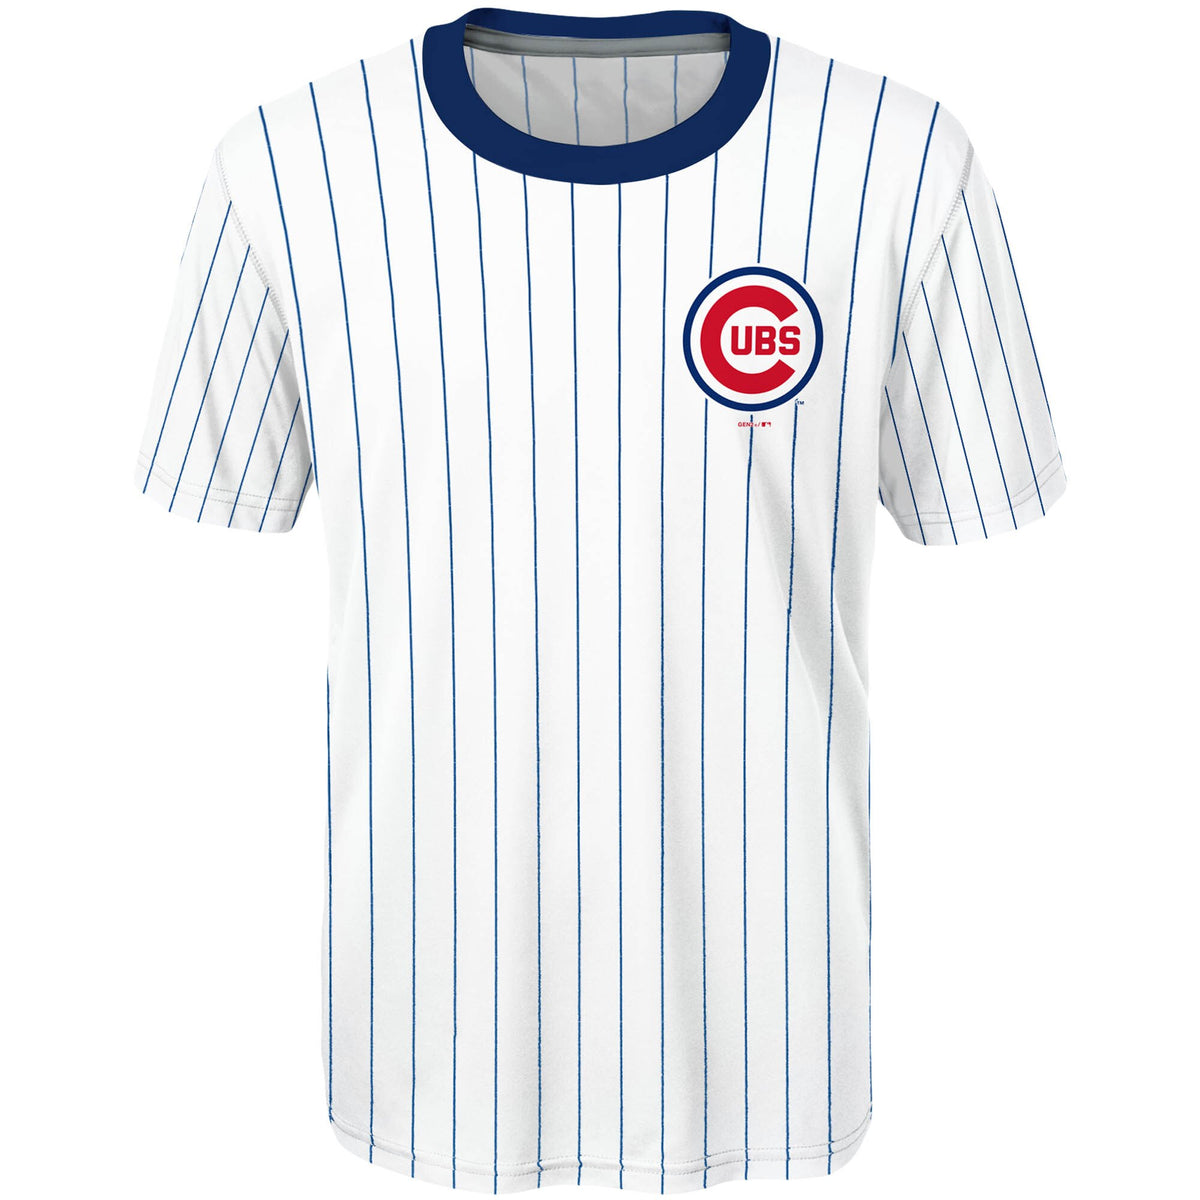 kris bryant youth jersey